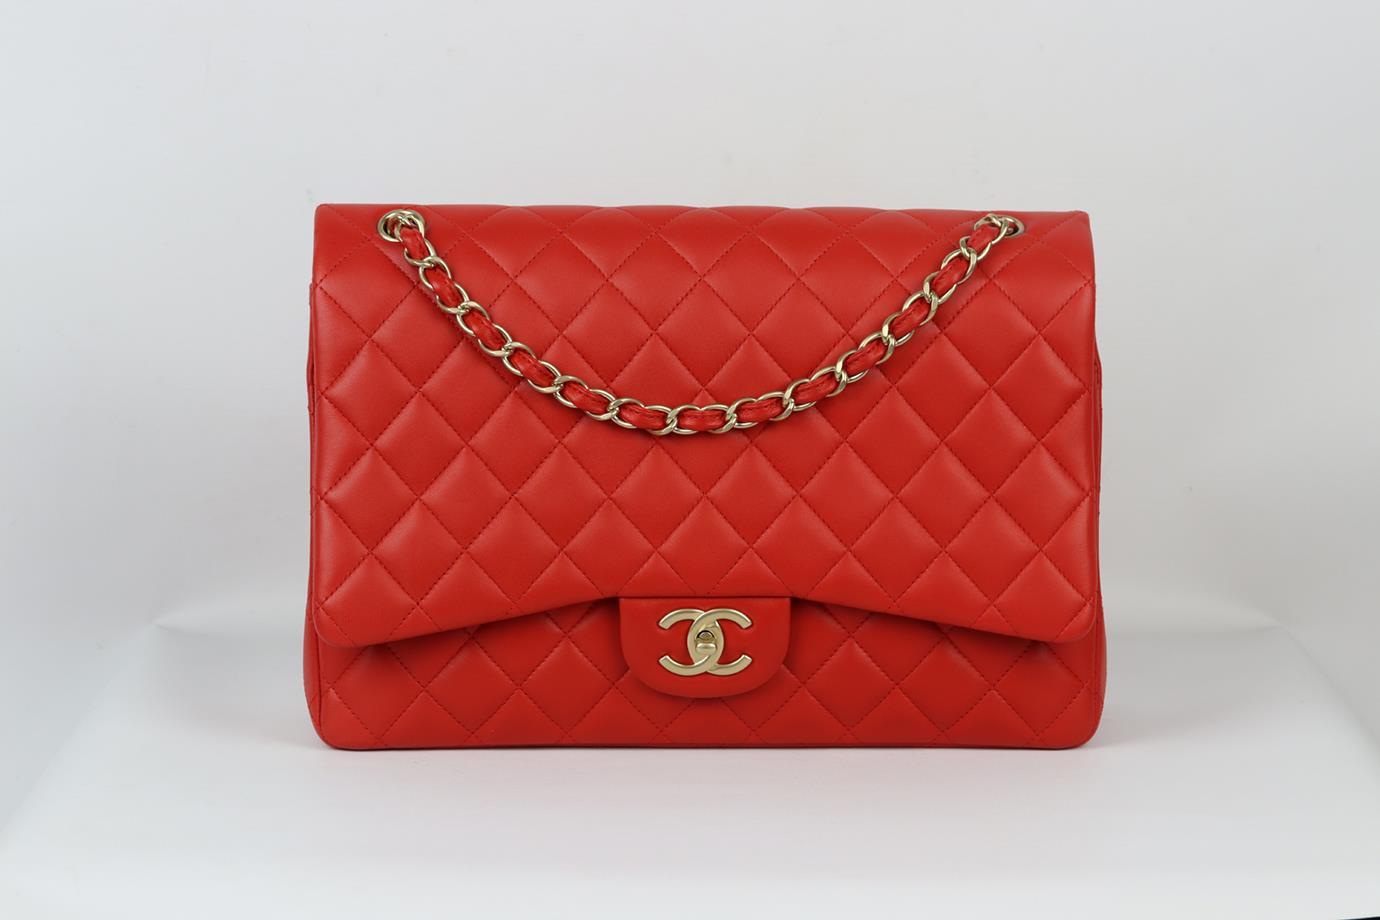 <ul>
<li>Chanel 2012 Maxi Classic quilted leather double flap shoulder bag.</li>
<li>Made from red quilted leather with matching red leather interior and antiqued gold-tone hardware and chain shoulder straps.</li>
<li>Red.</li>
<li>Twist lock